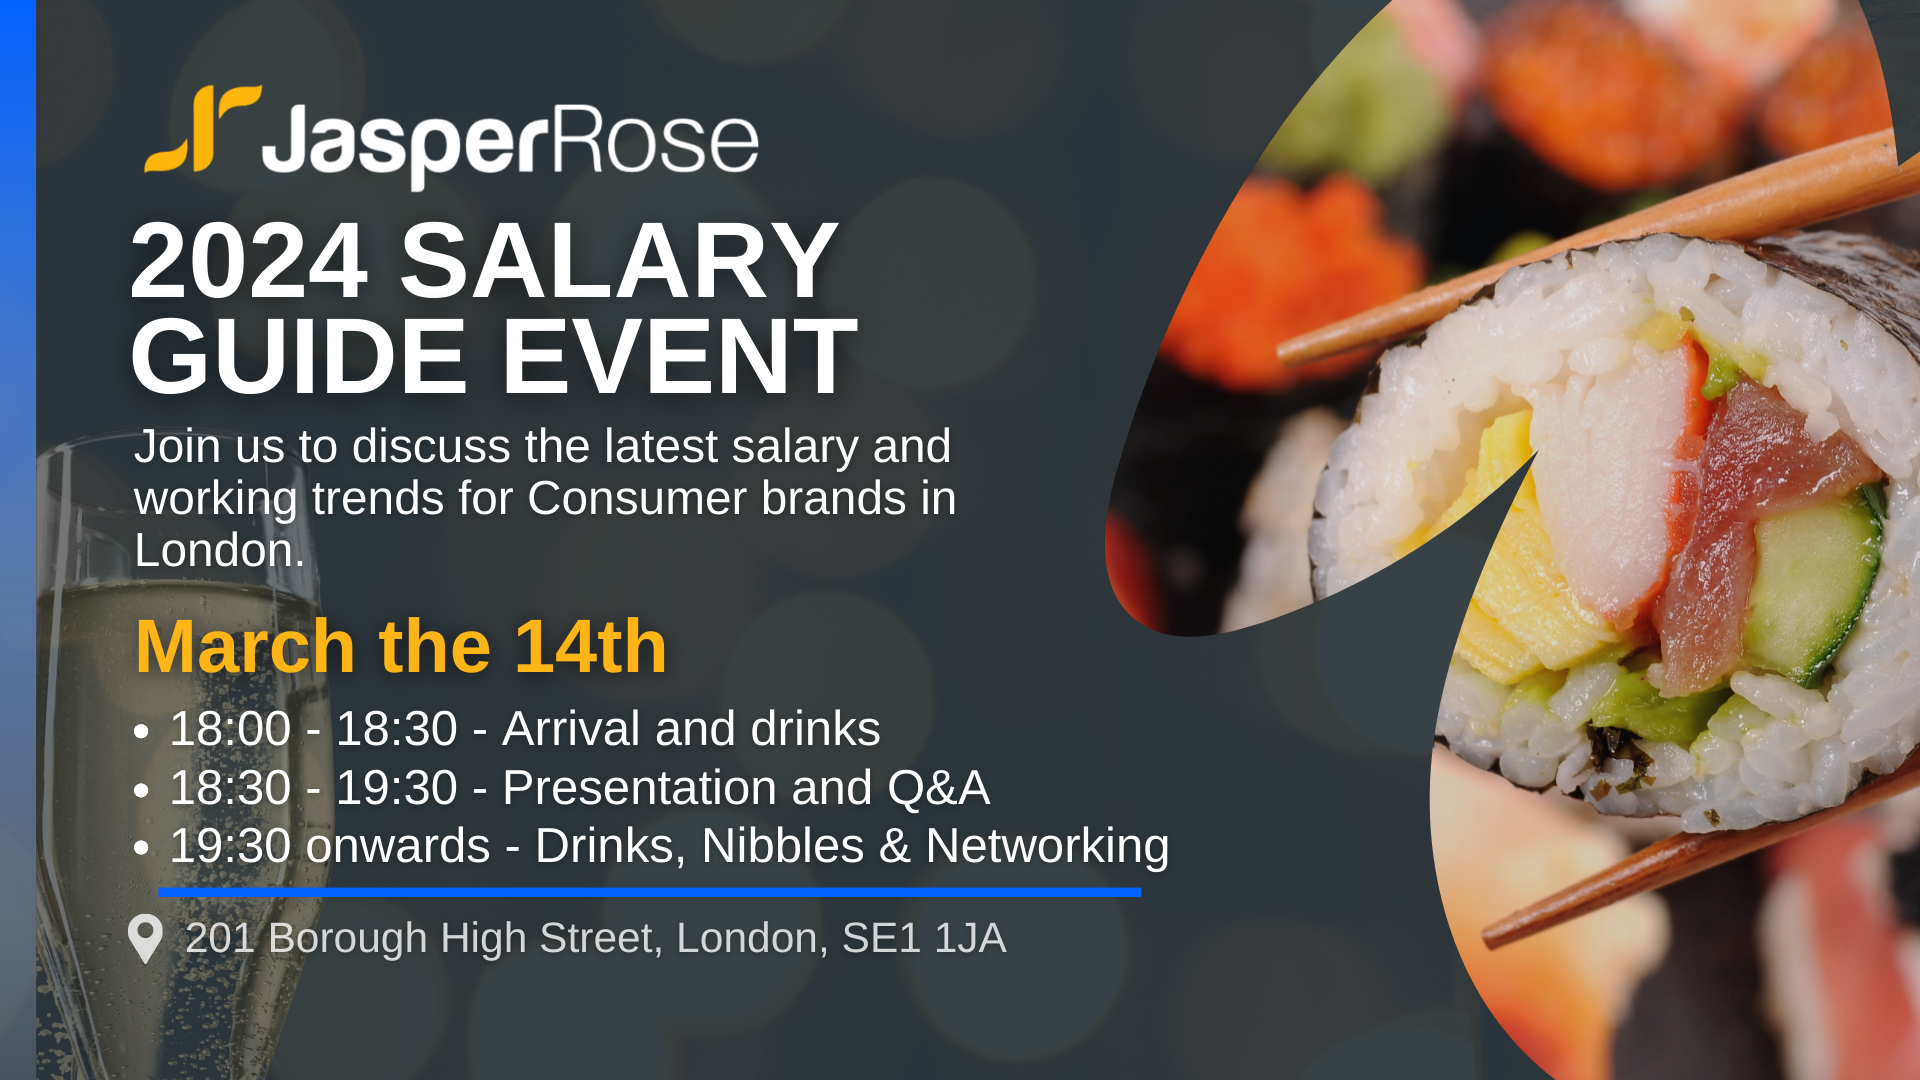 2024 Salary Guide Event